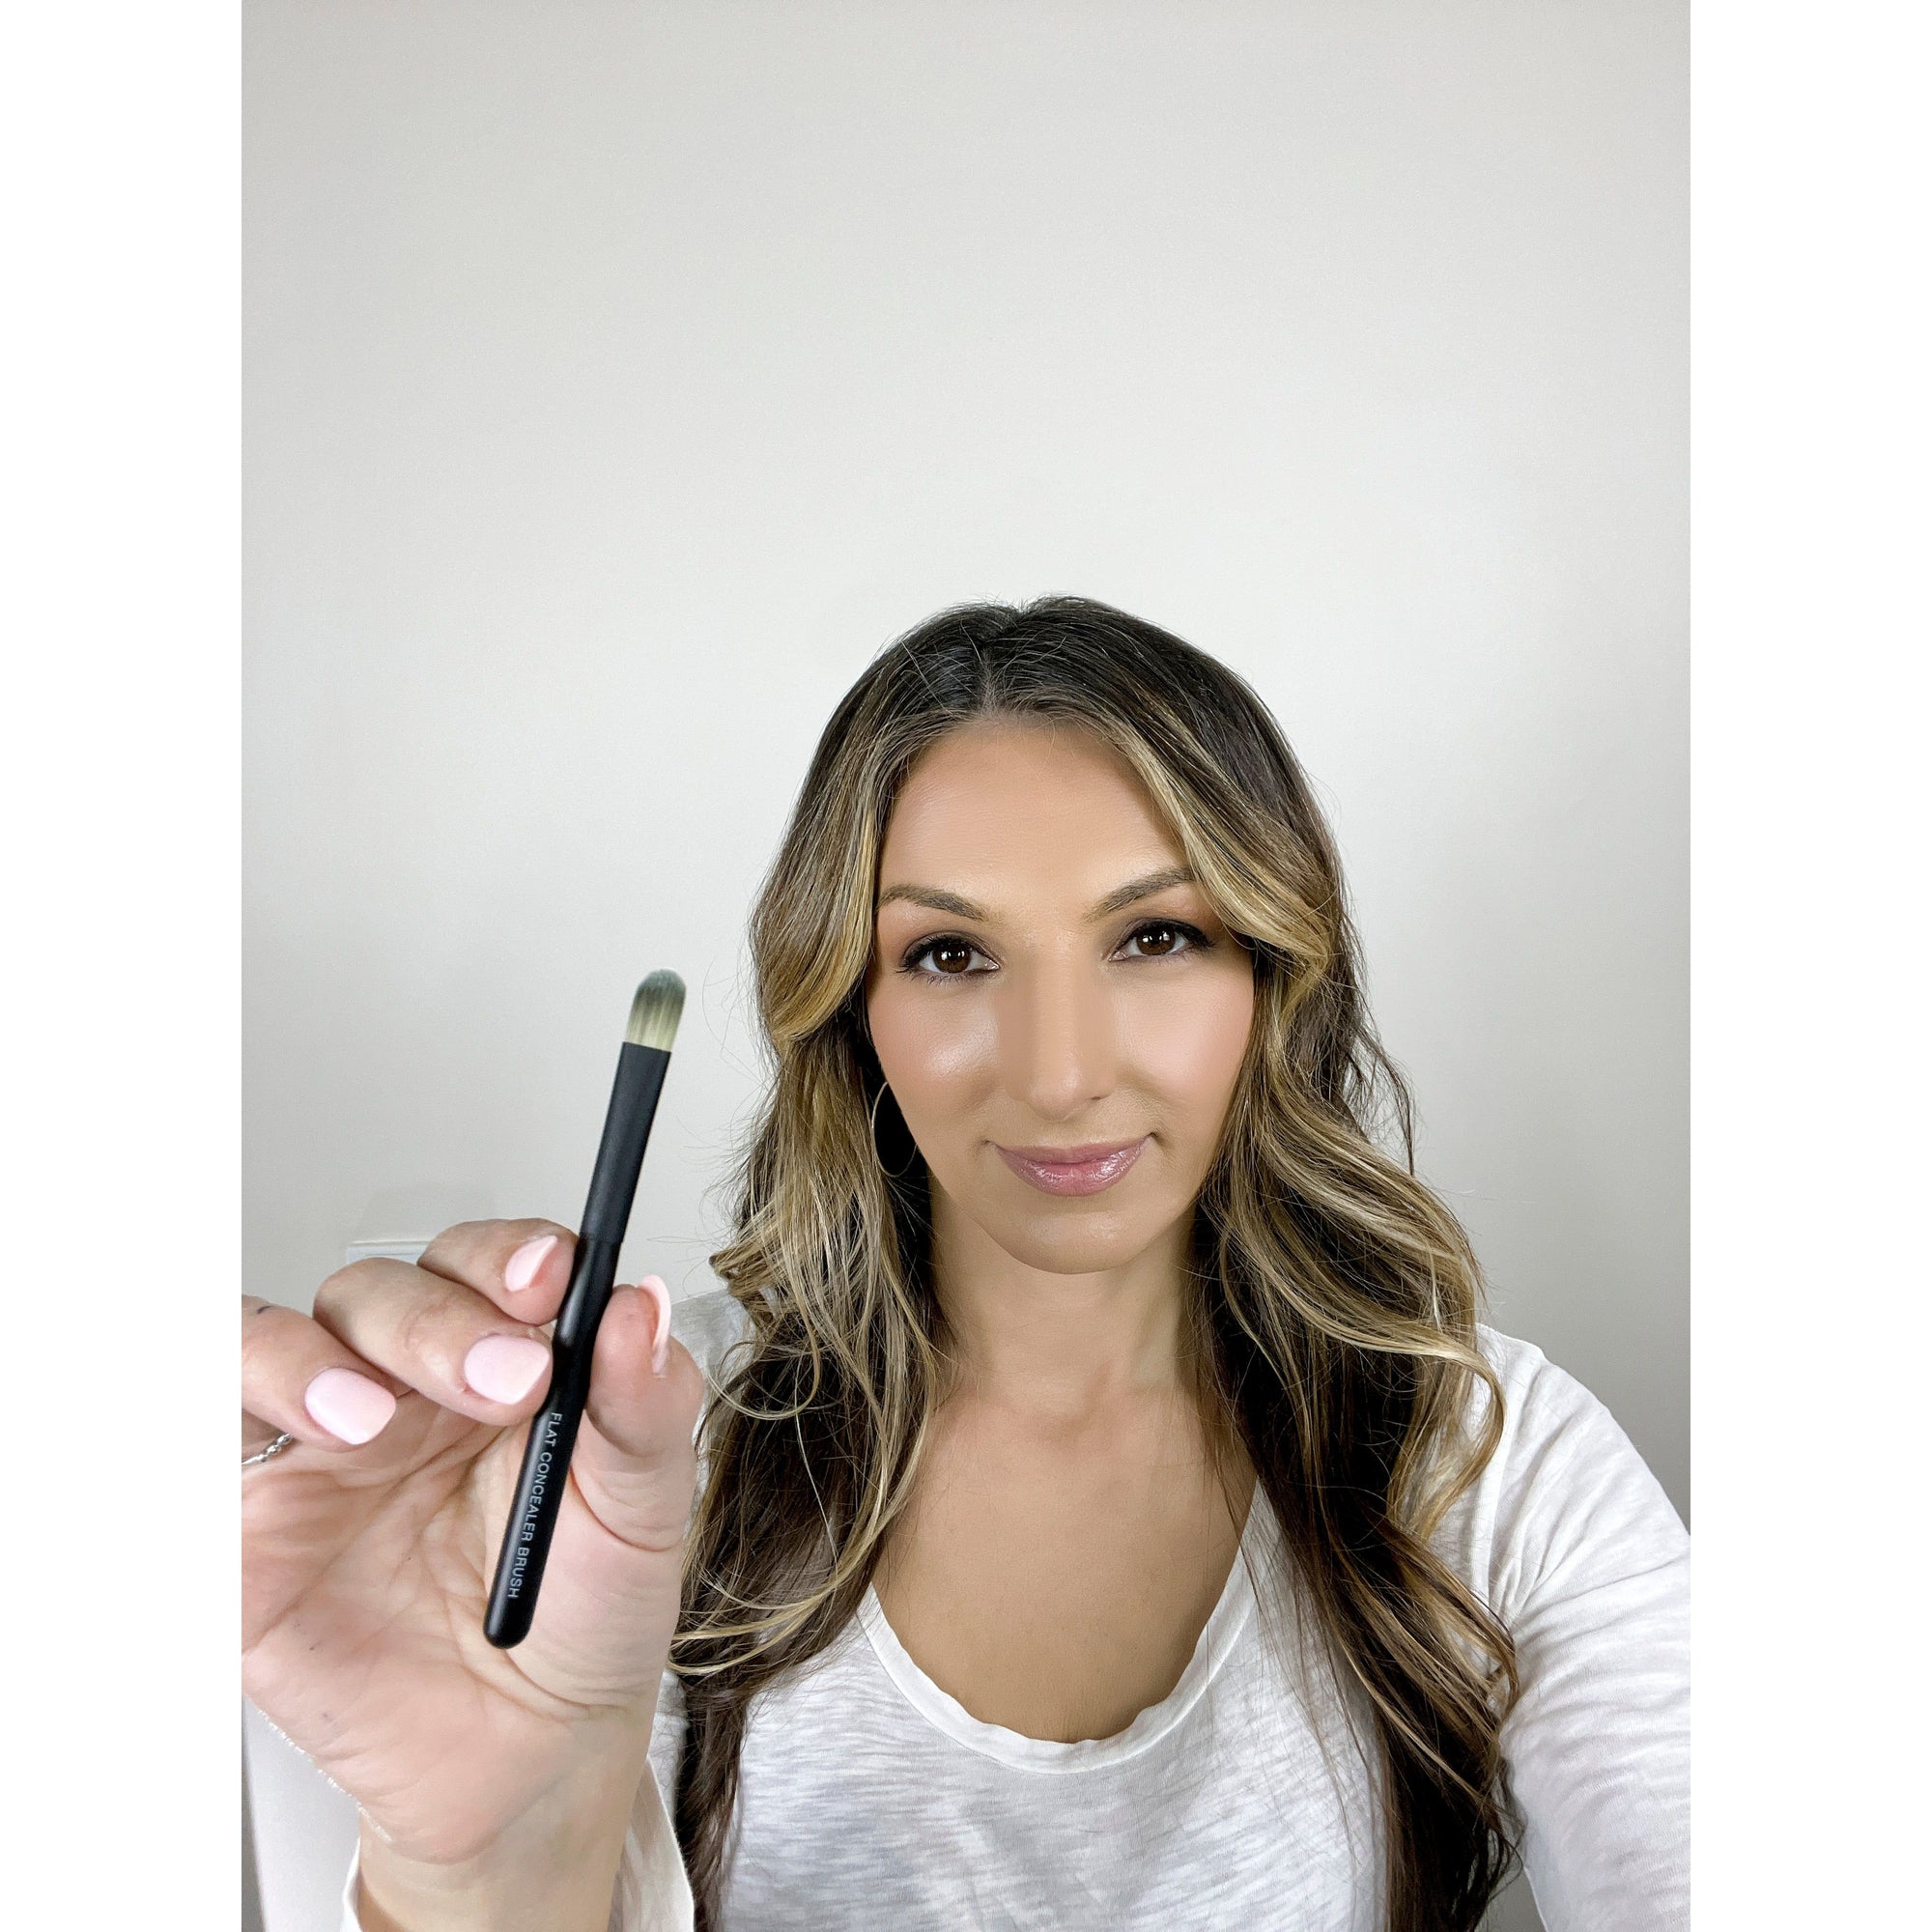 The Concealer Brush, by Jacqueline Kalab - MyMakeup.Store by Jacqueline Kalab